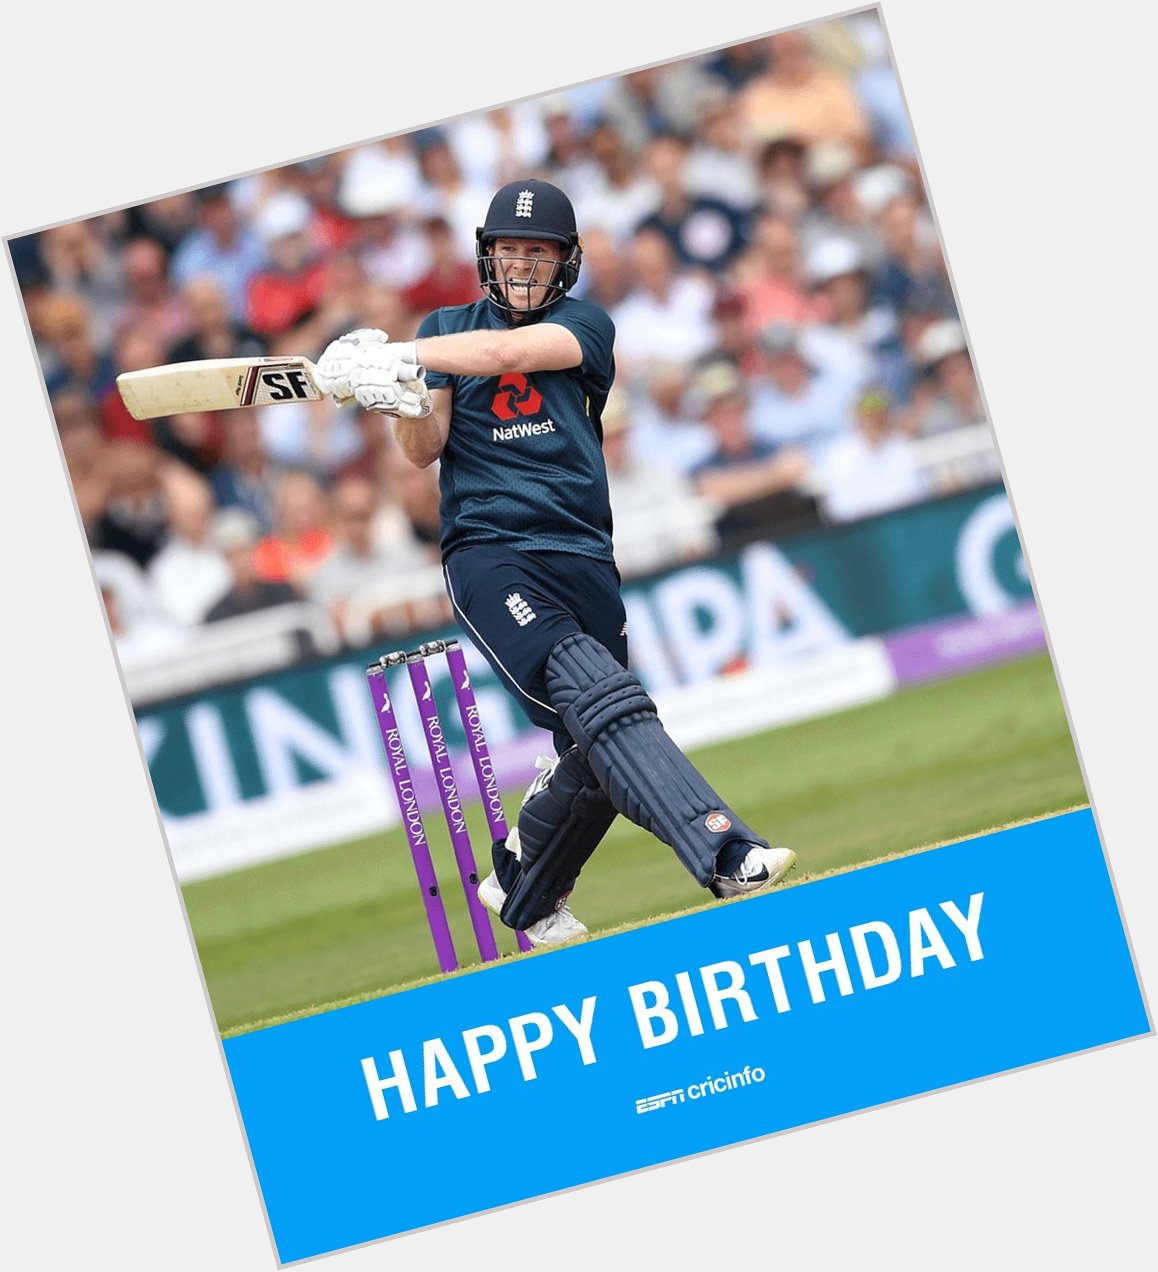  Happy birthday to Eoin Morgan, England\s limited-overs captain! 

 